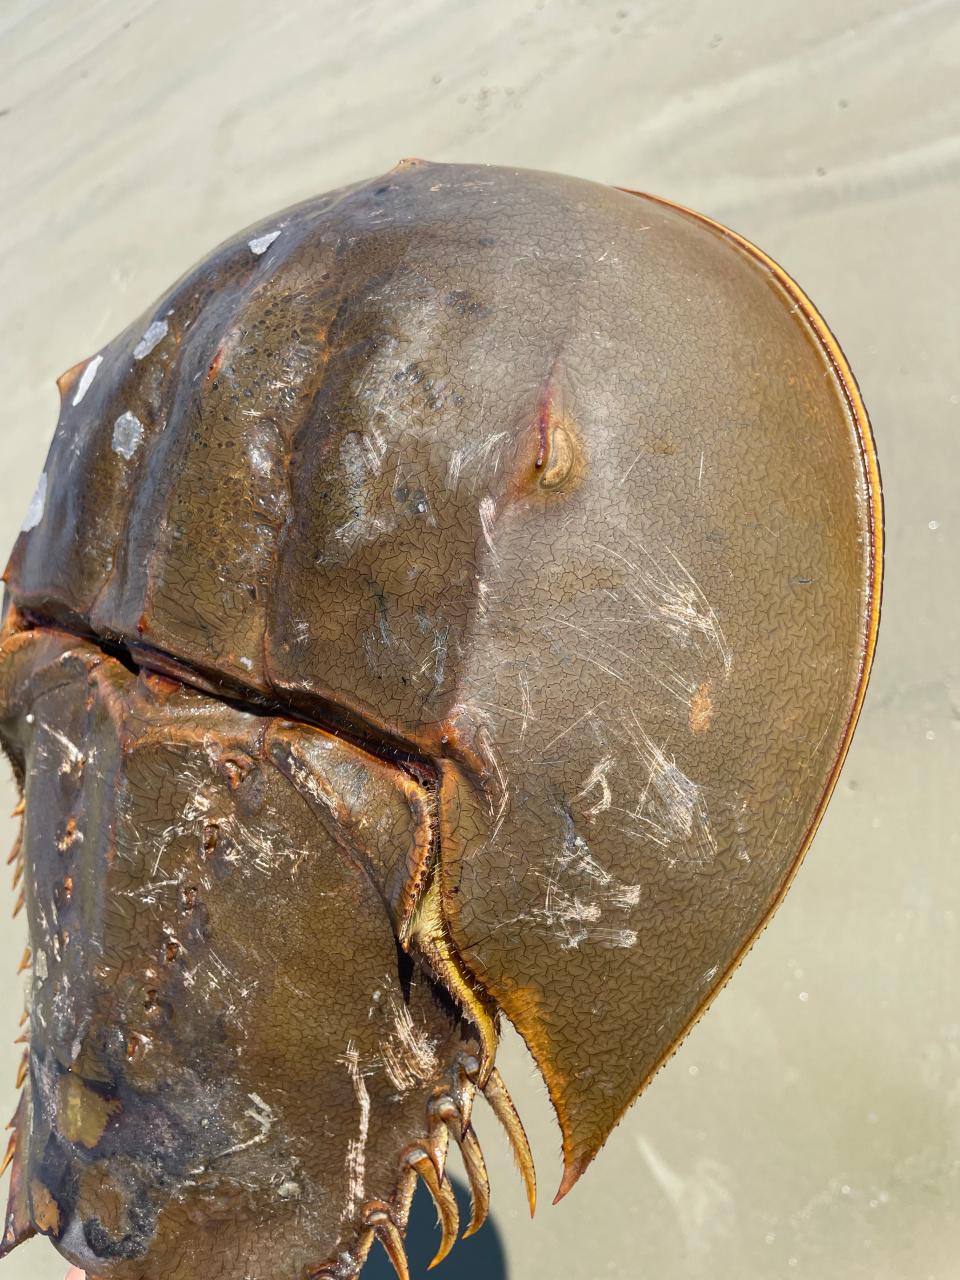 A large female crab spotted on the beach. The first horseshoe shaped segment of this creatures are called the prosoma, the spikey second segment is the opisthosoma and the pointy but harmless tail is the telson.